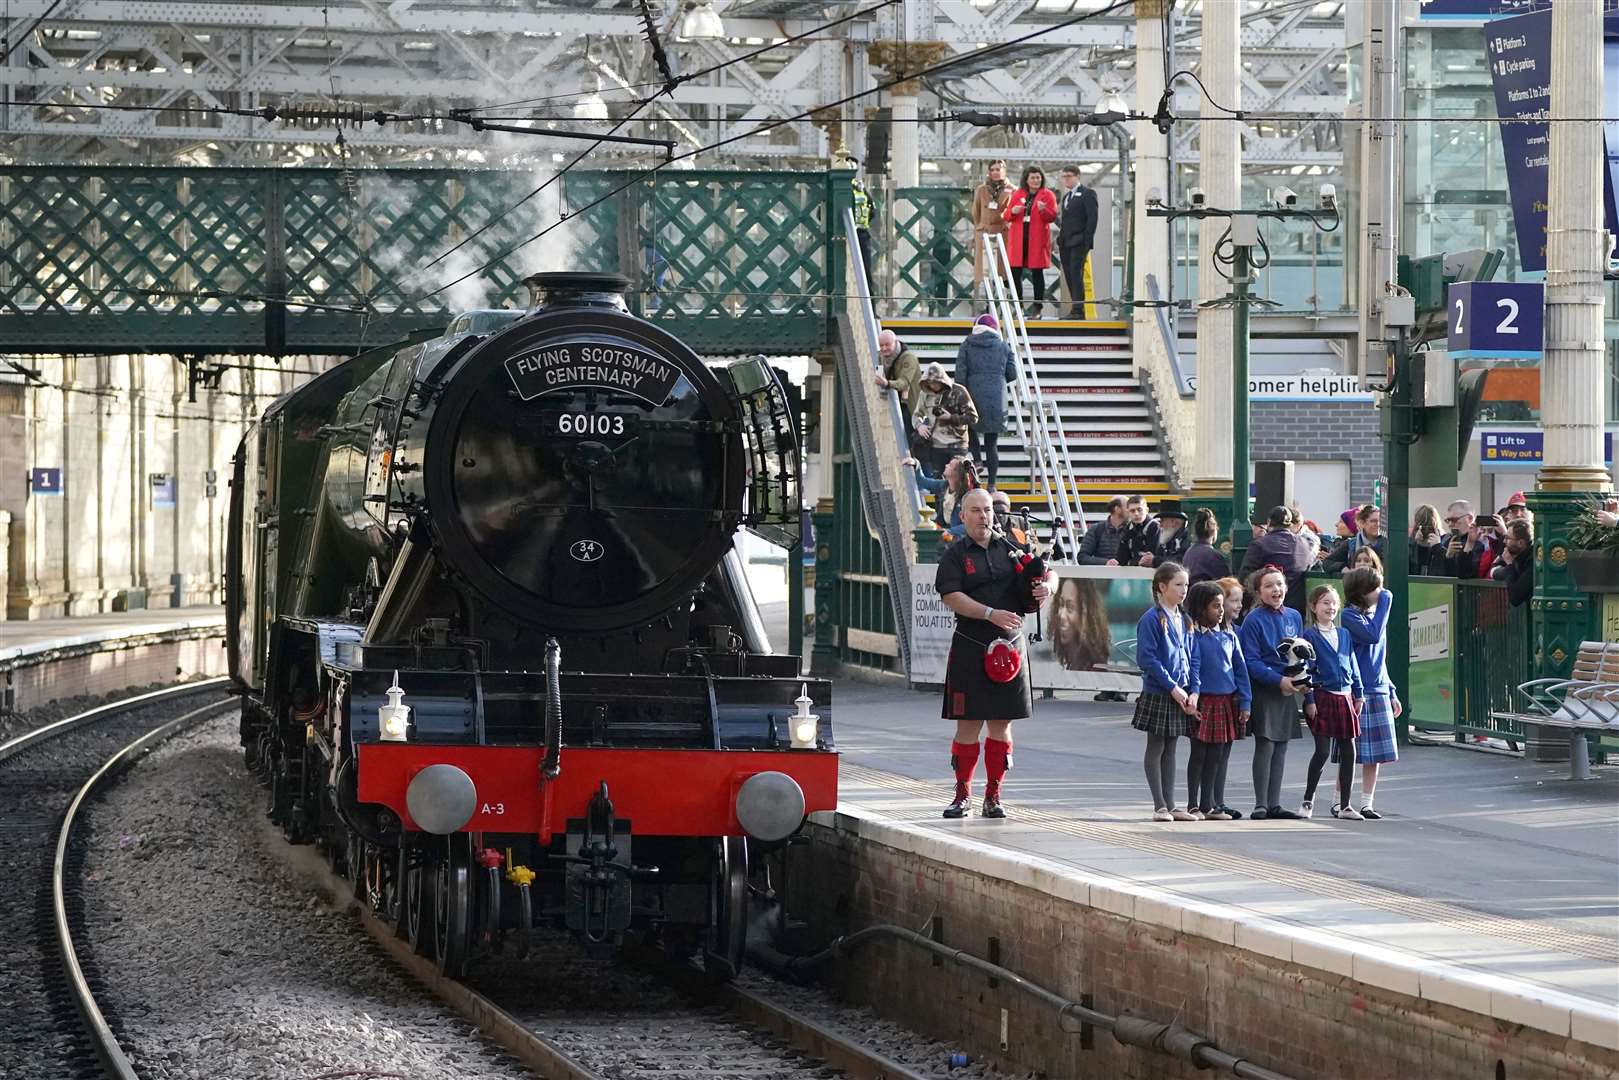 Flying Scotsman entered service on February 24, 1923 (Andrew Milligan/PA)